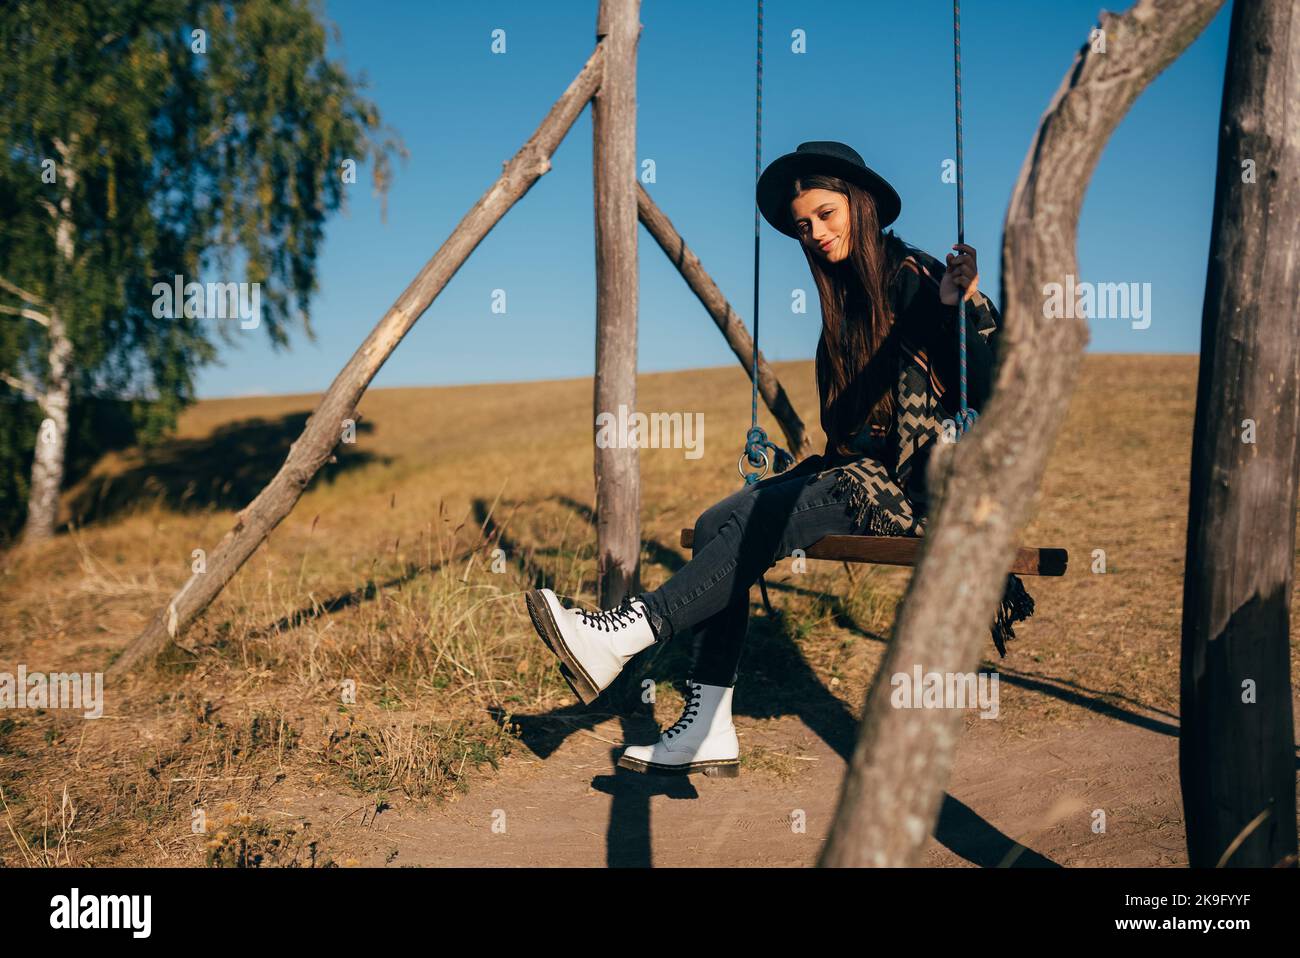 Young beautiful woman rides on a swing in the countryside Stock Photo